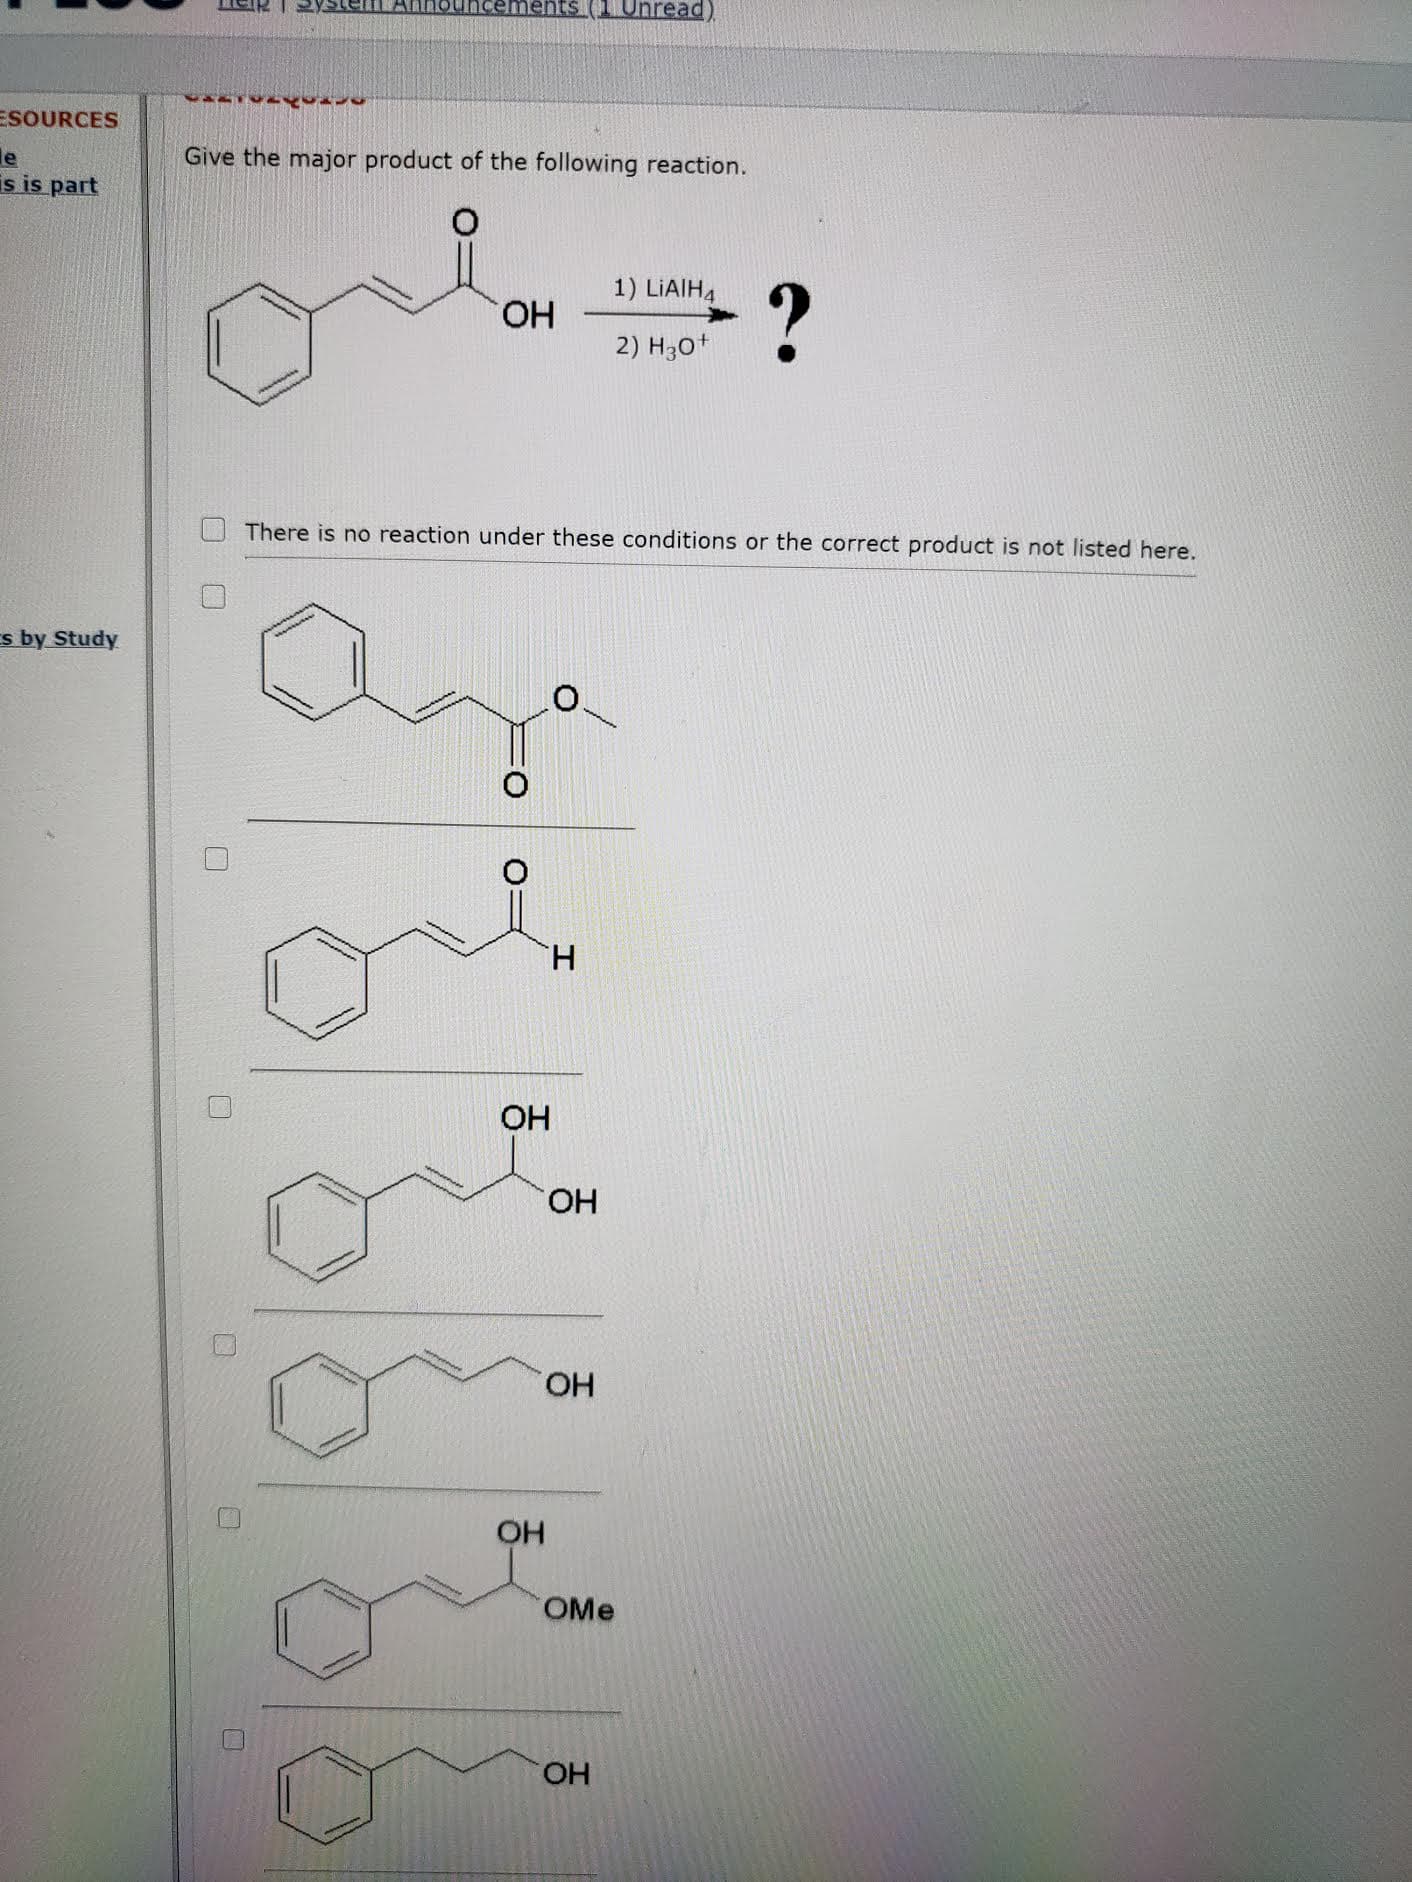 Give the major product of the following reaction.
1) LIAIH,
?
HO,
2) H30+
O There is no reaction under these conditions or the correct product is not listed here.
H.
OH
HO.
HO.
OH
OMe
